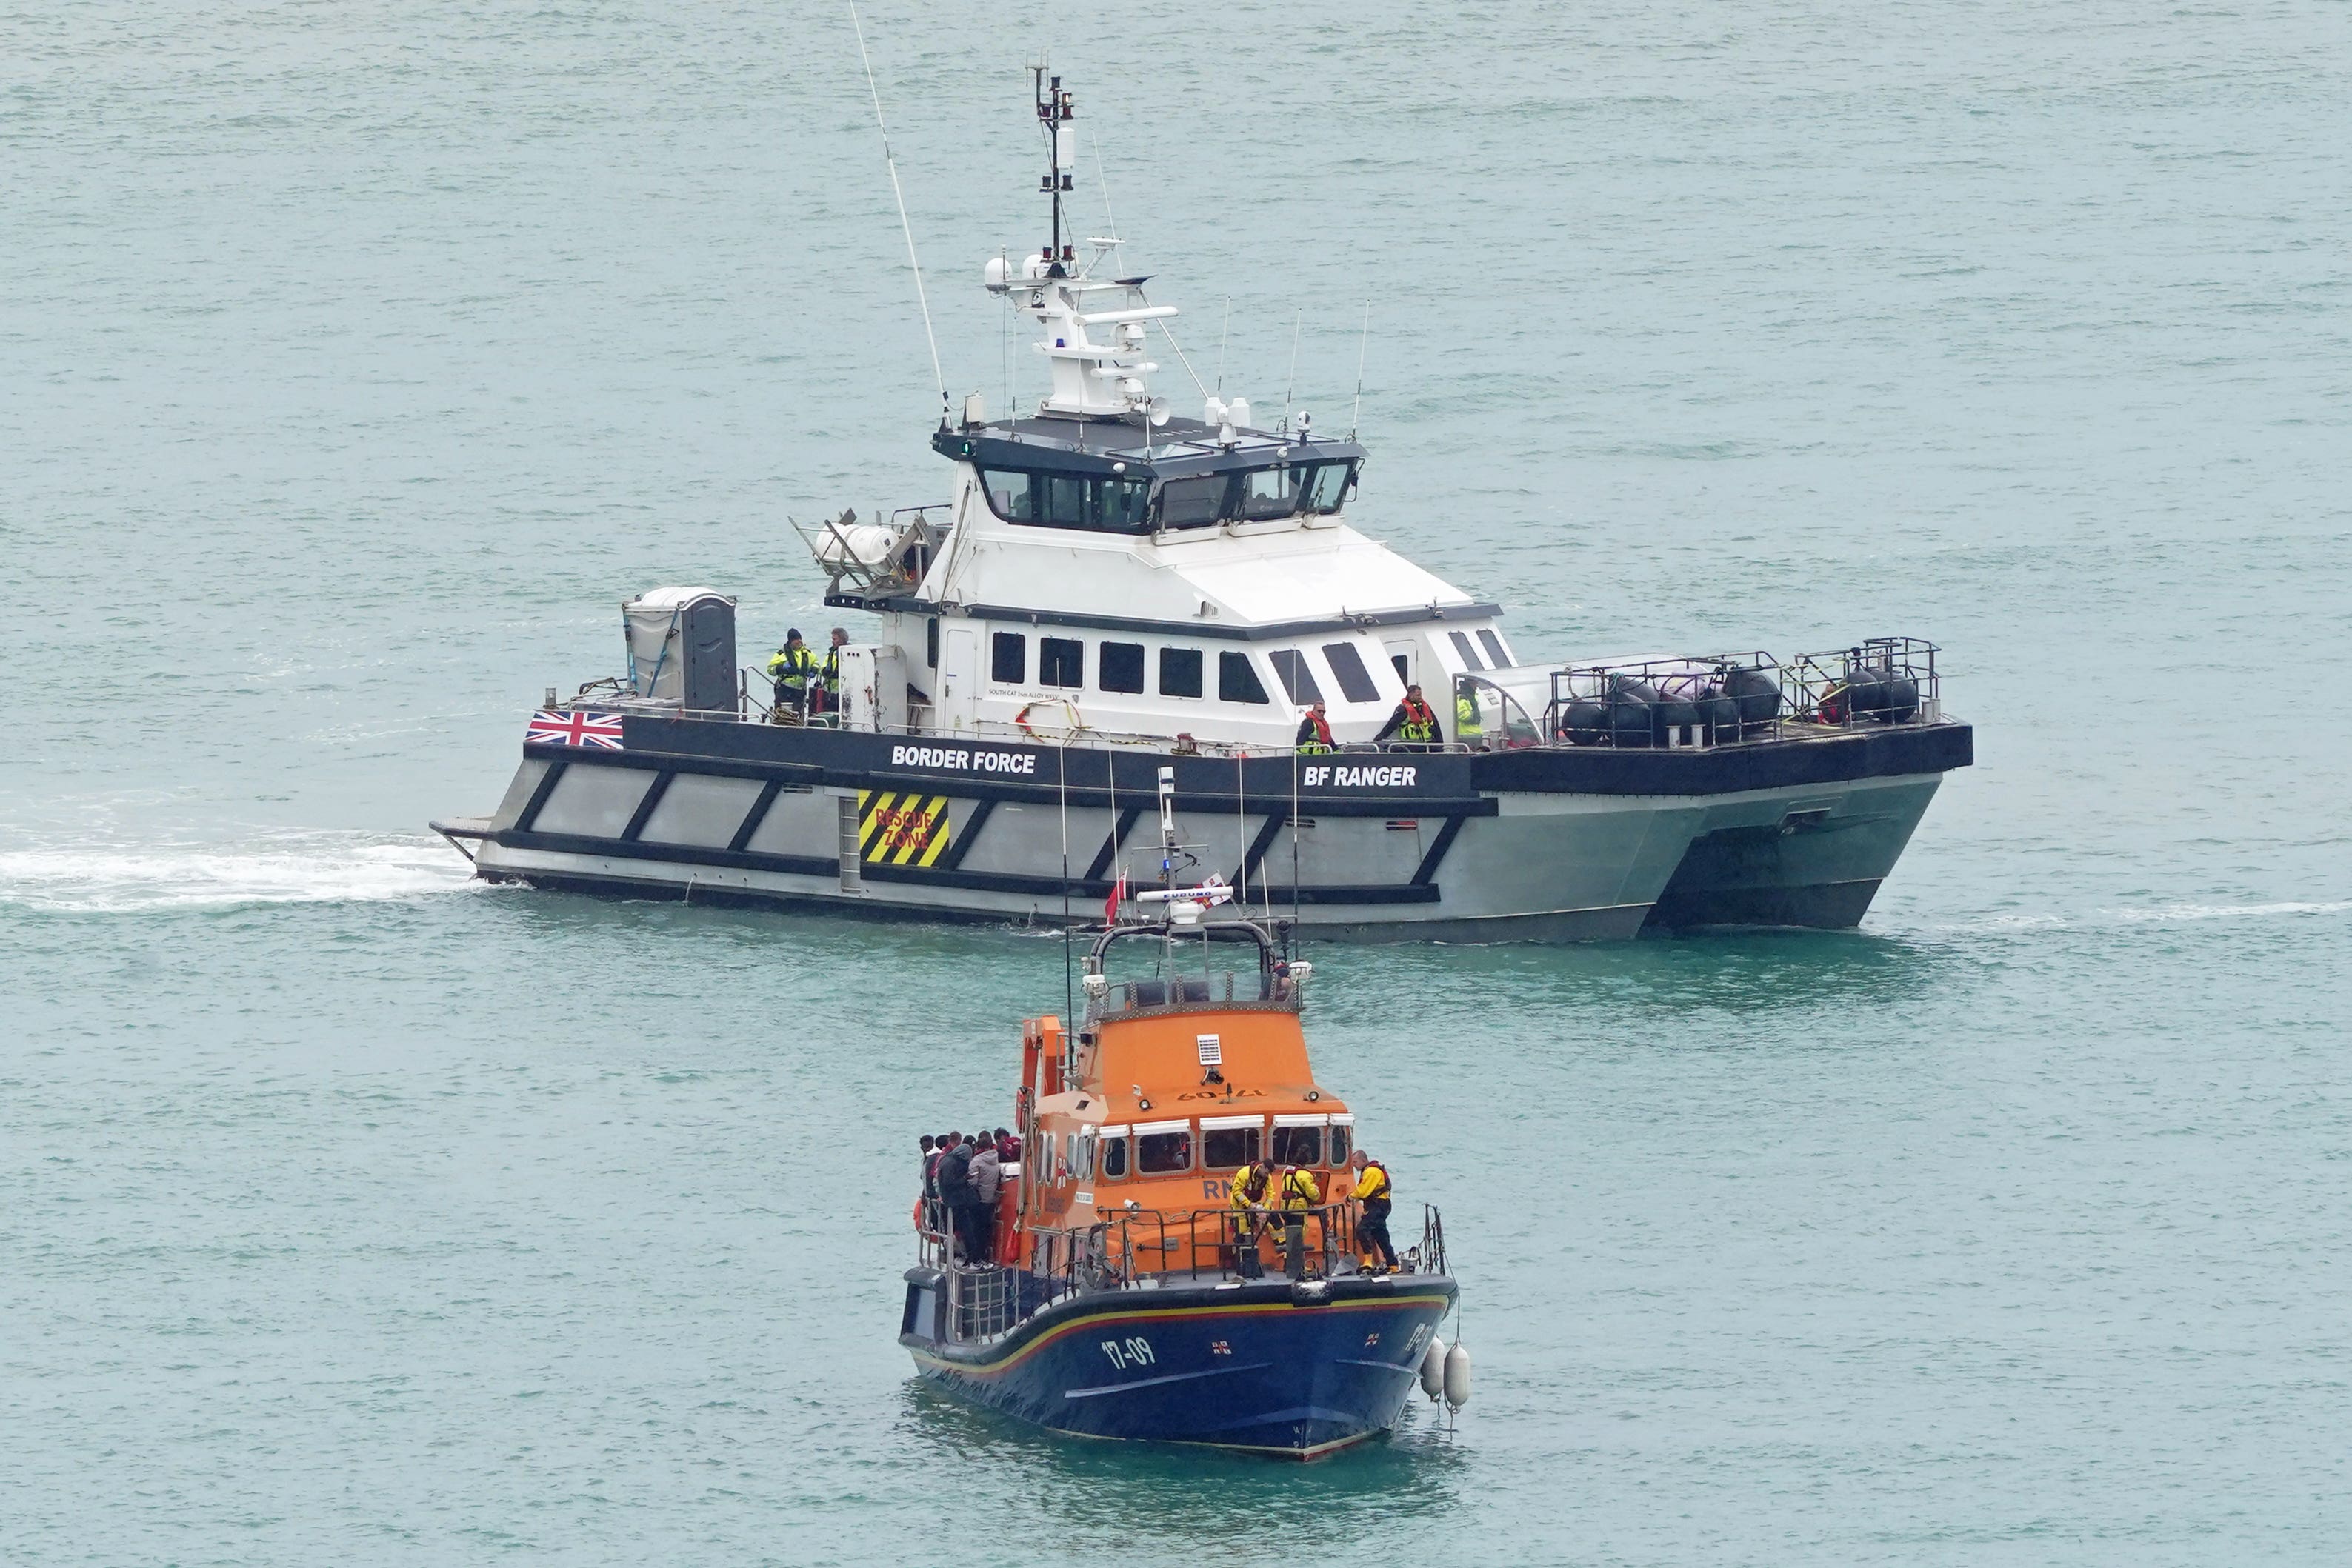 A Border Force vessel and an RNLI lifeboat were dispatched from Dover